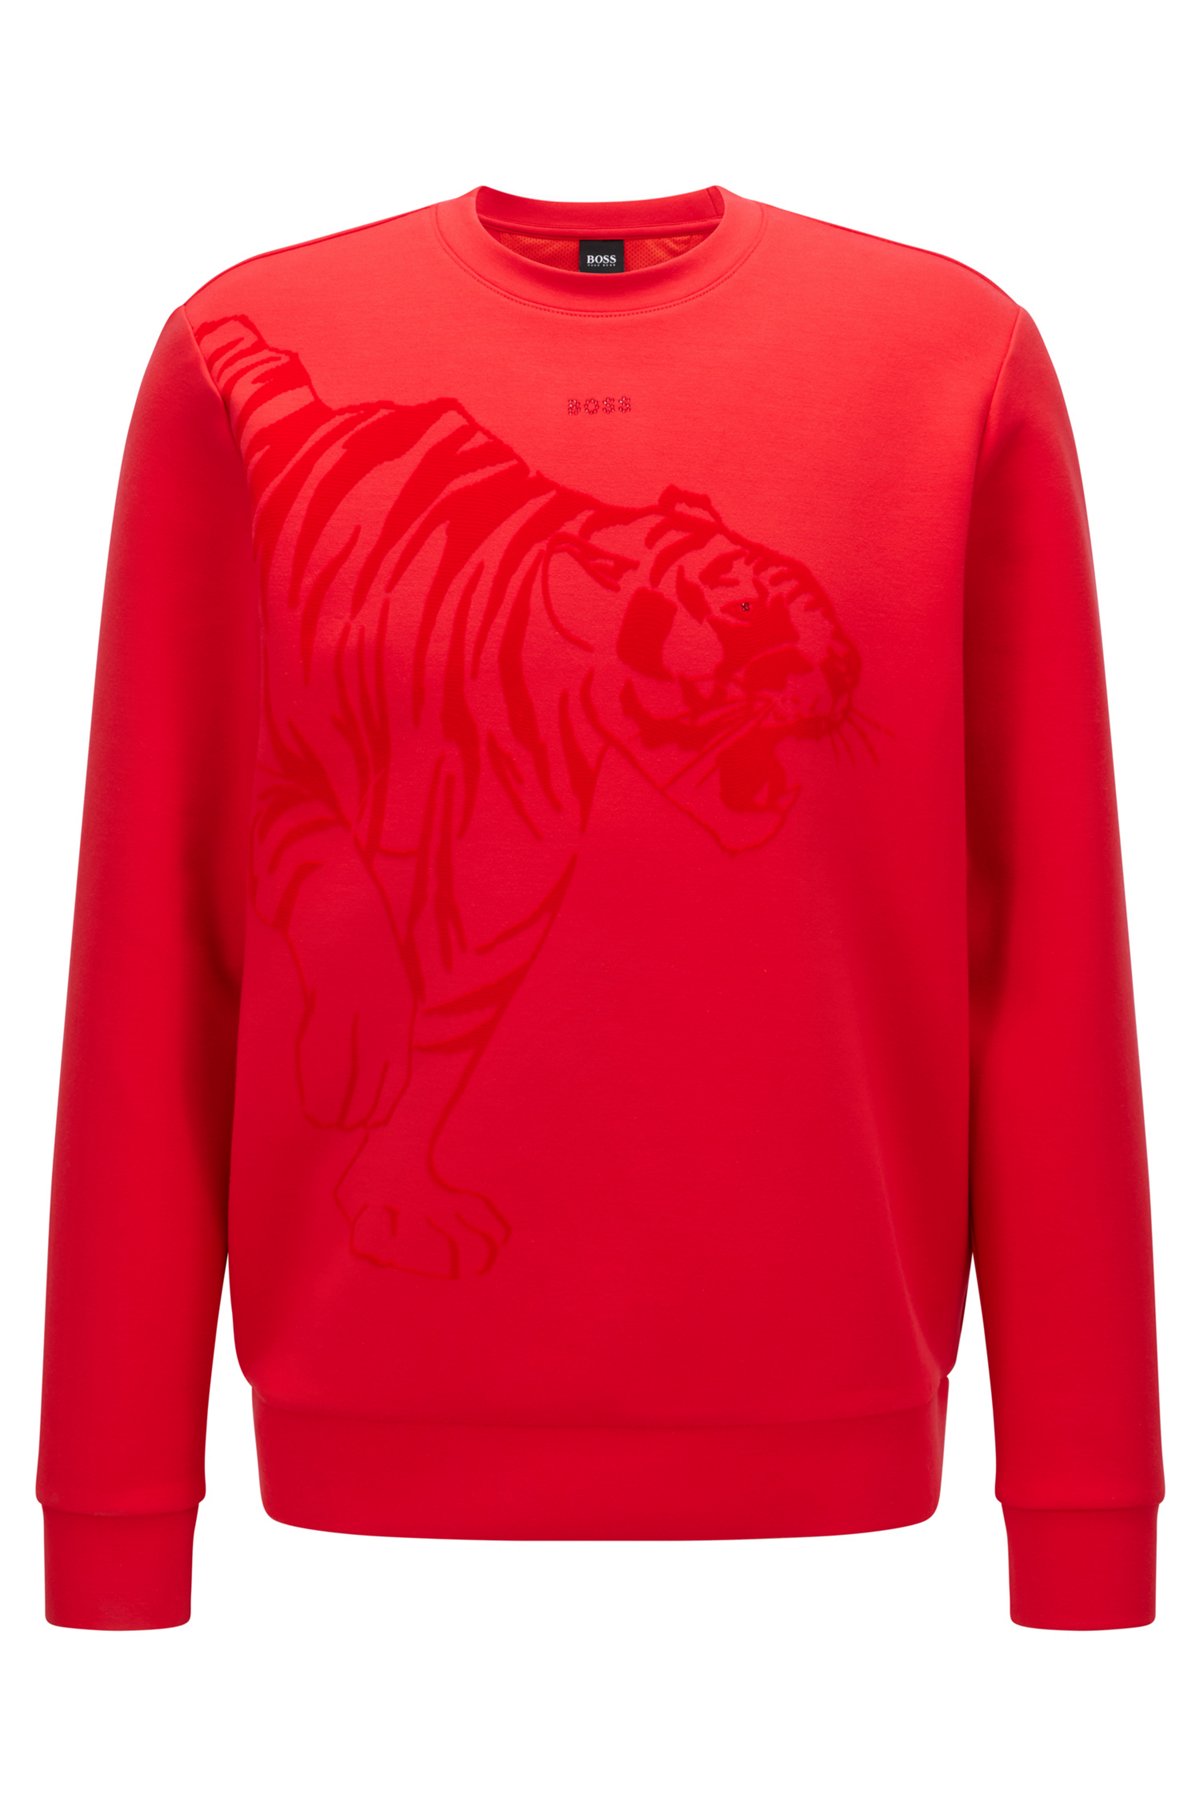 BOSS - Relaxed-fit jersey sweatshirt with flock-print tiger artwork